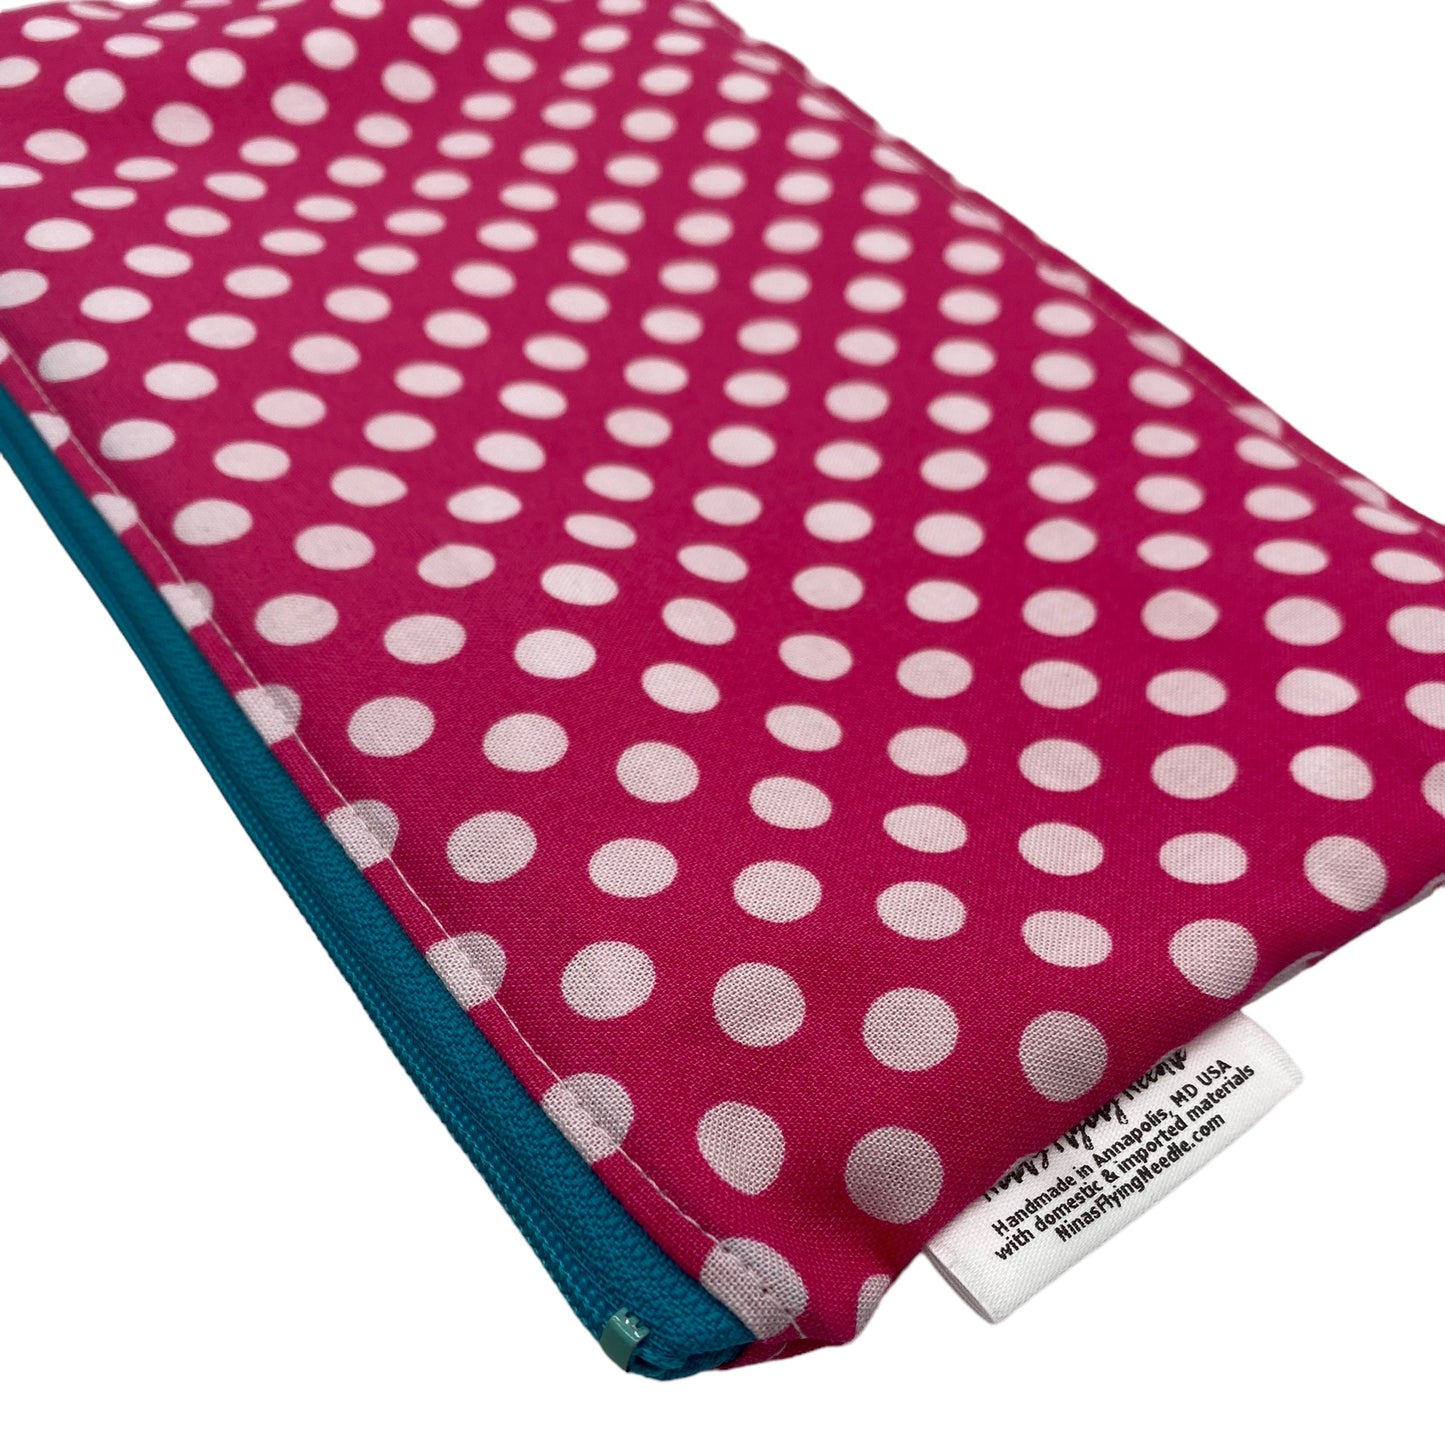 Travel Sized Wet Bag Polka Dots on Hot Pink